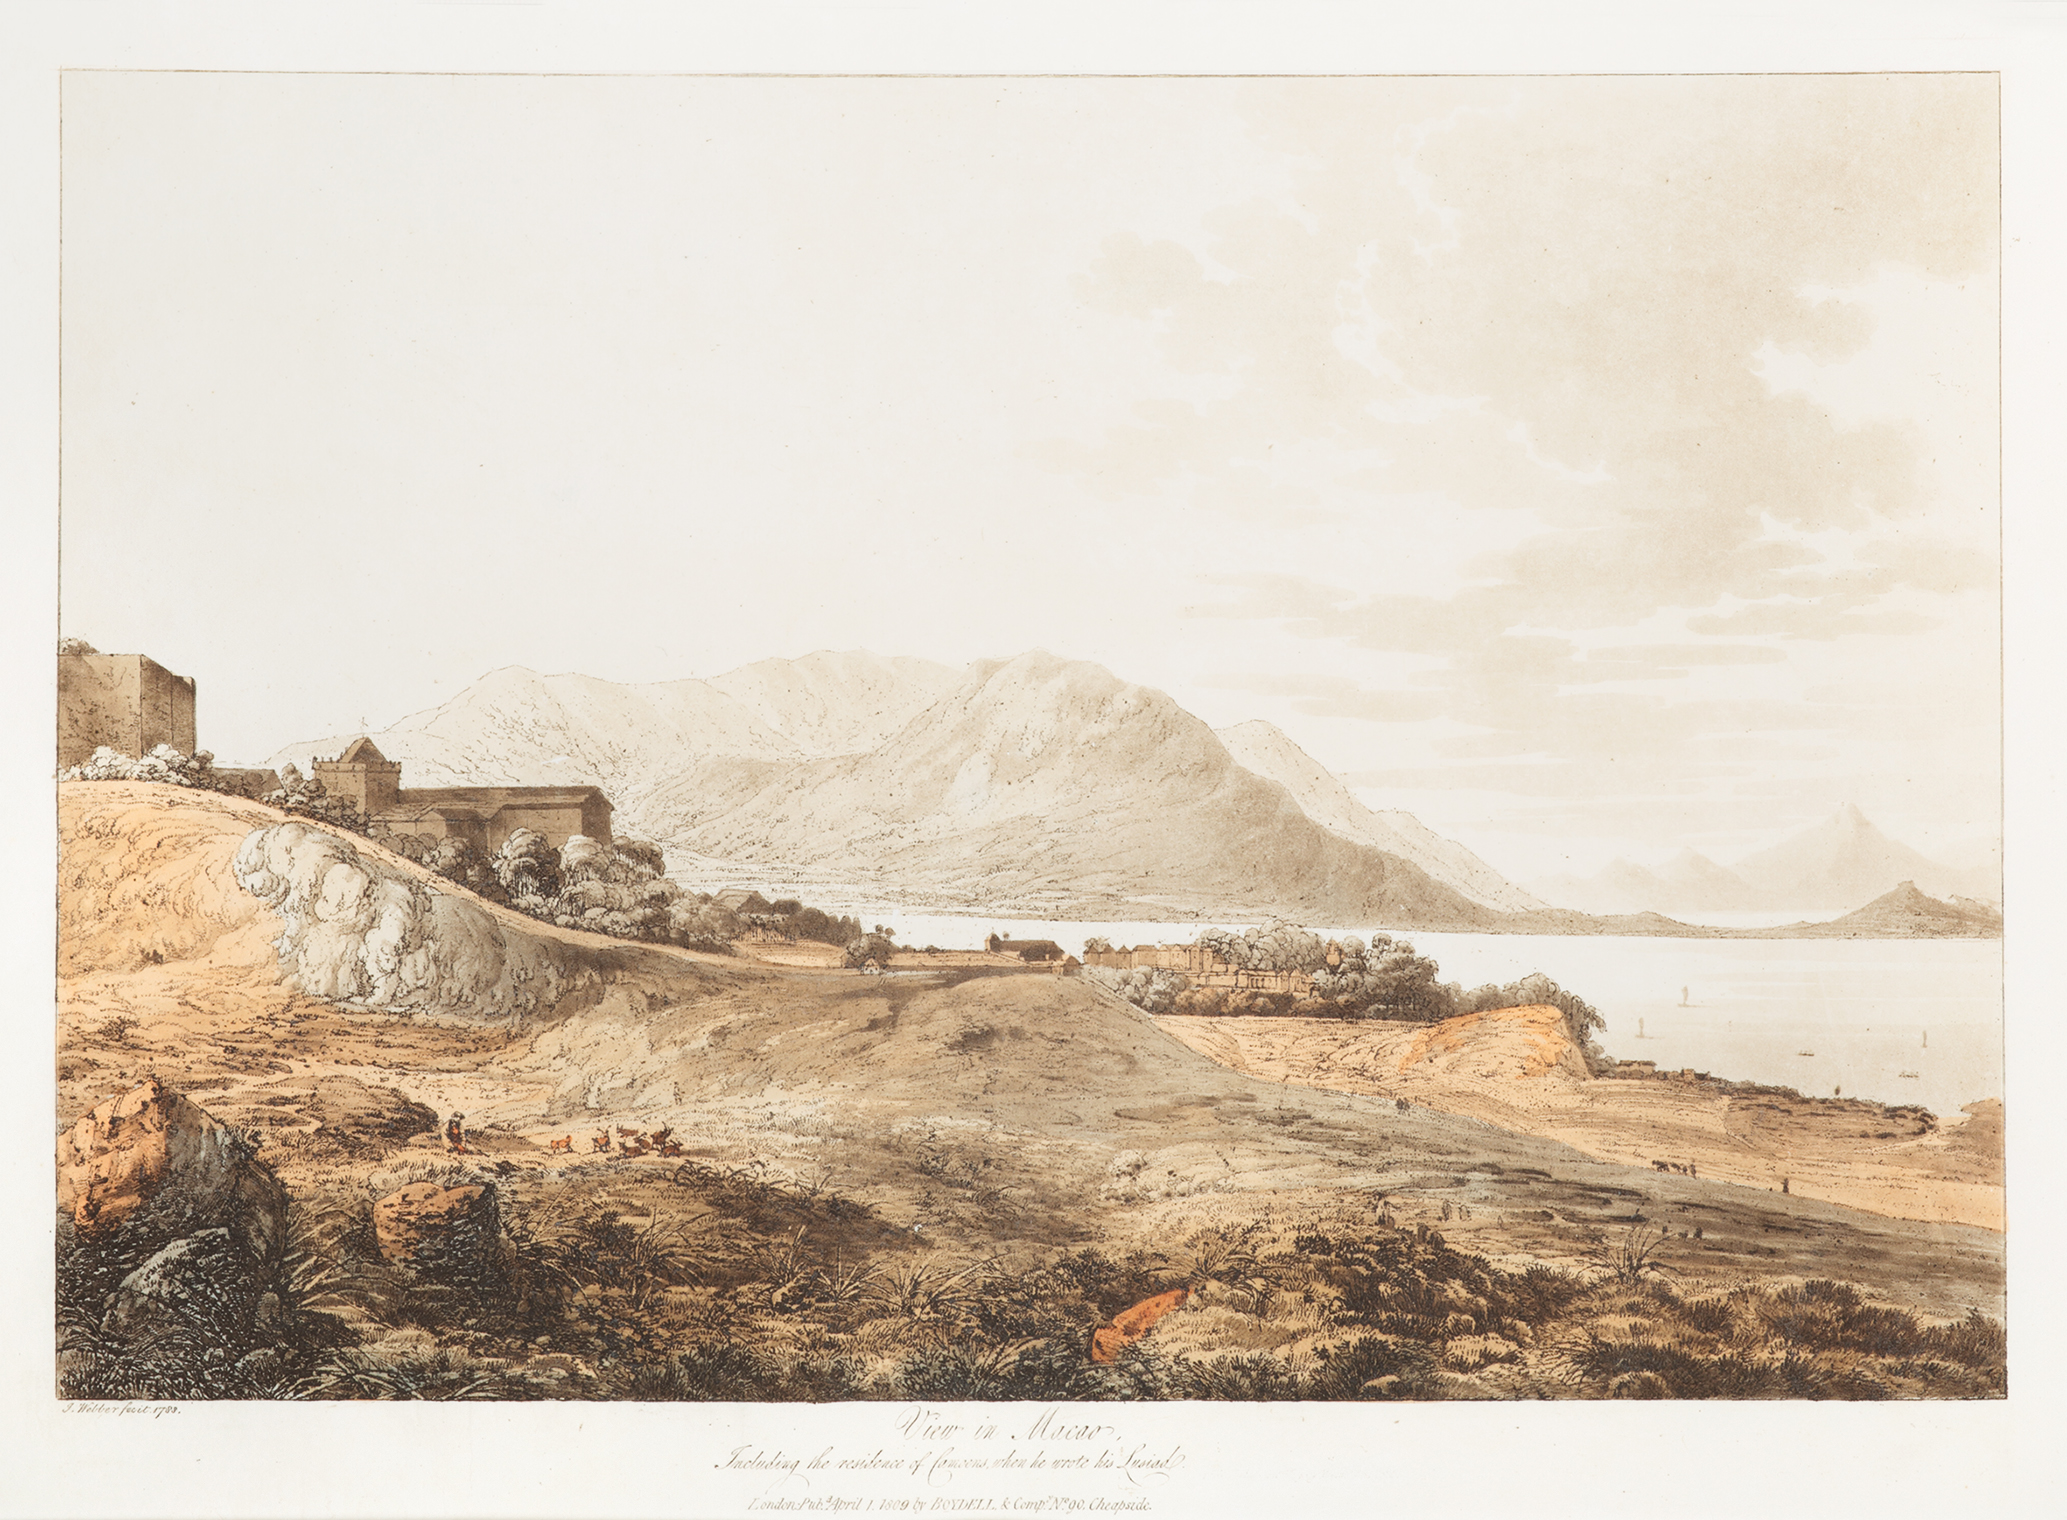 View in Macao, including the residence Camoens, when he wrote his Lusiad. - Antique View from 1819